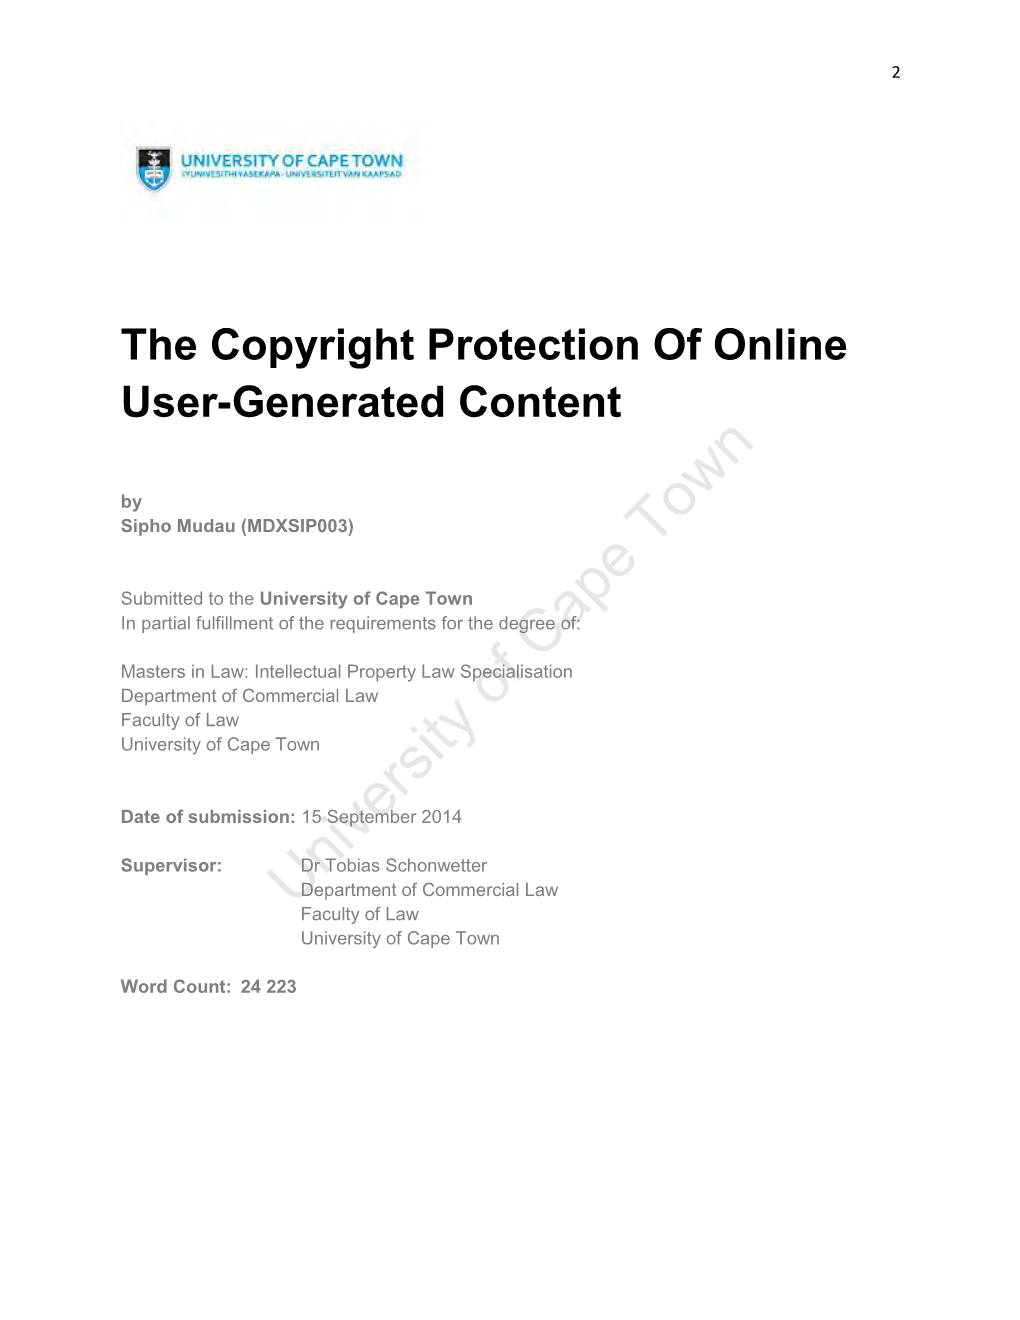 The Copyright Protection of Online User-Generated Content